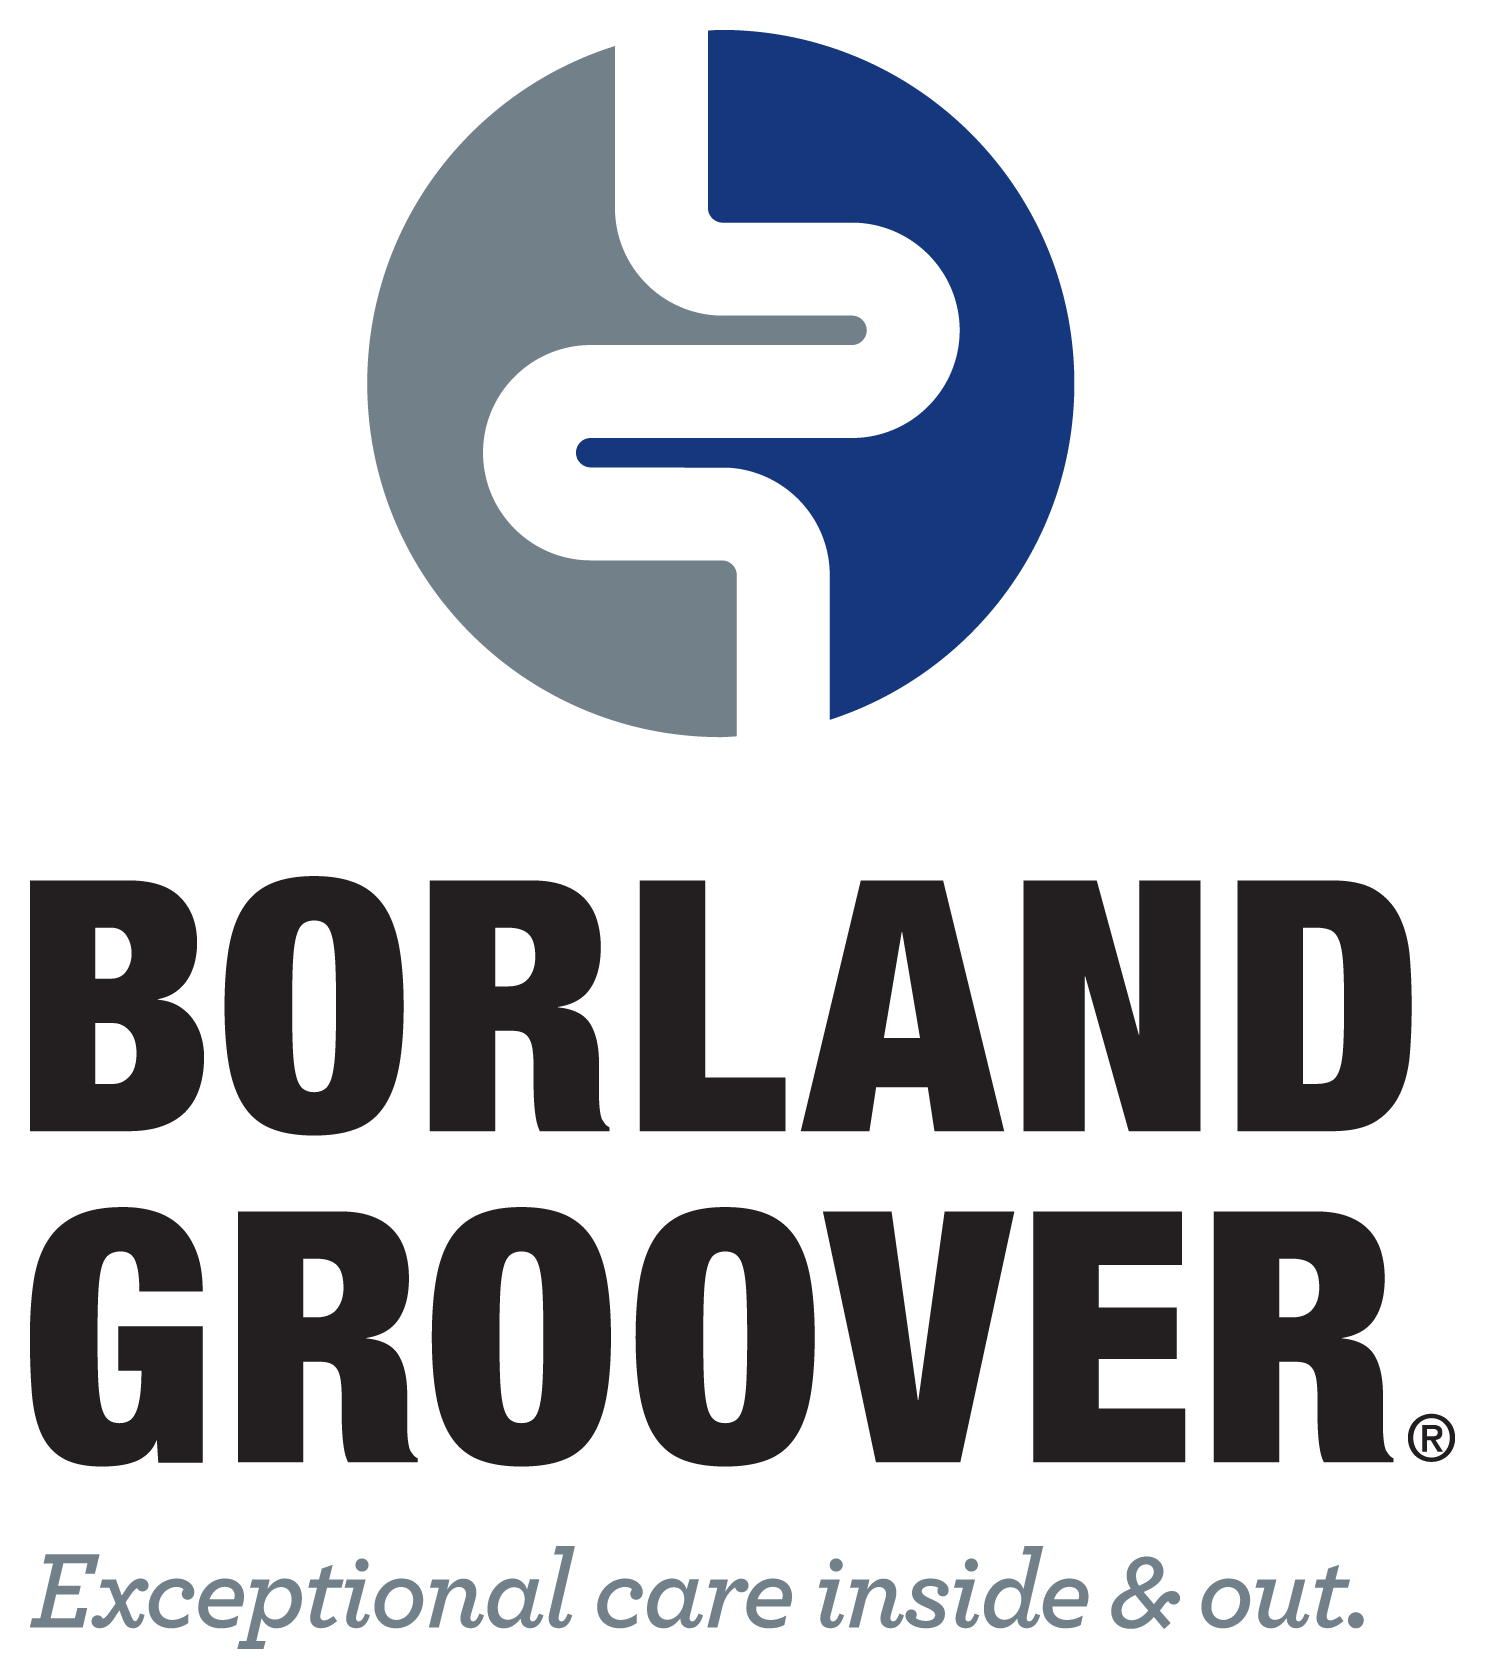 Borland Groover (Volunteer Recognition)